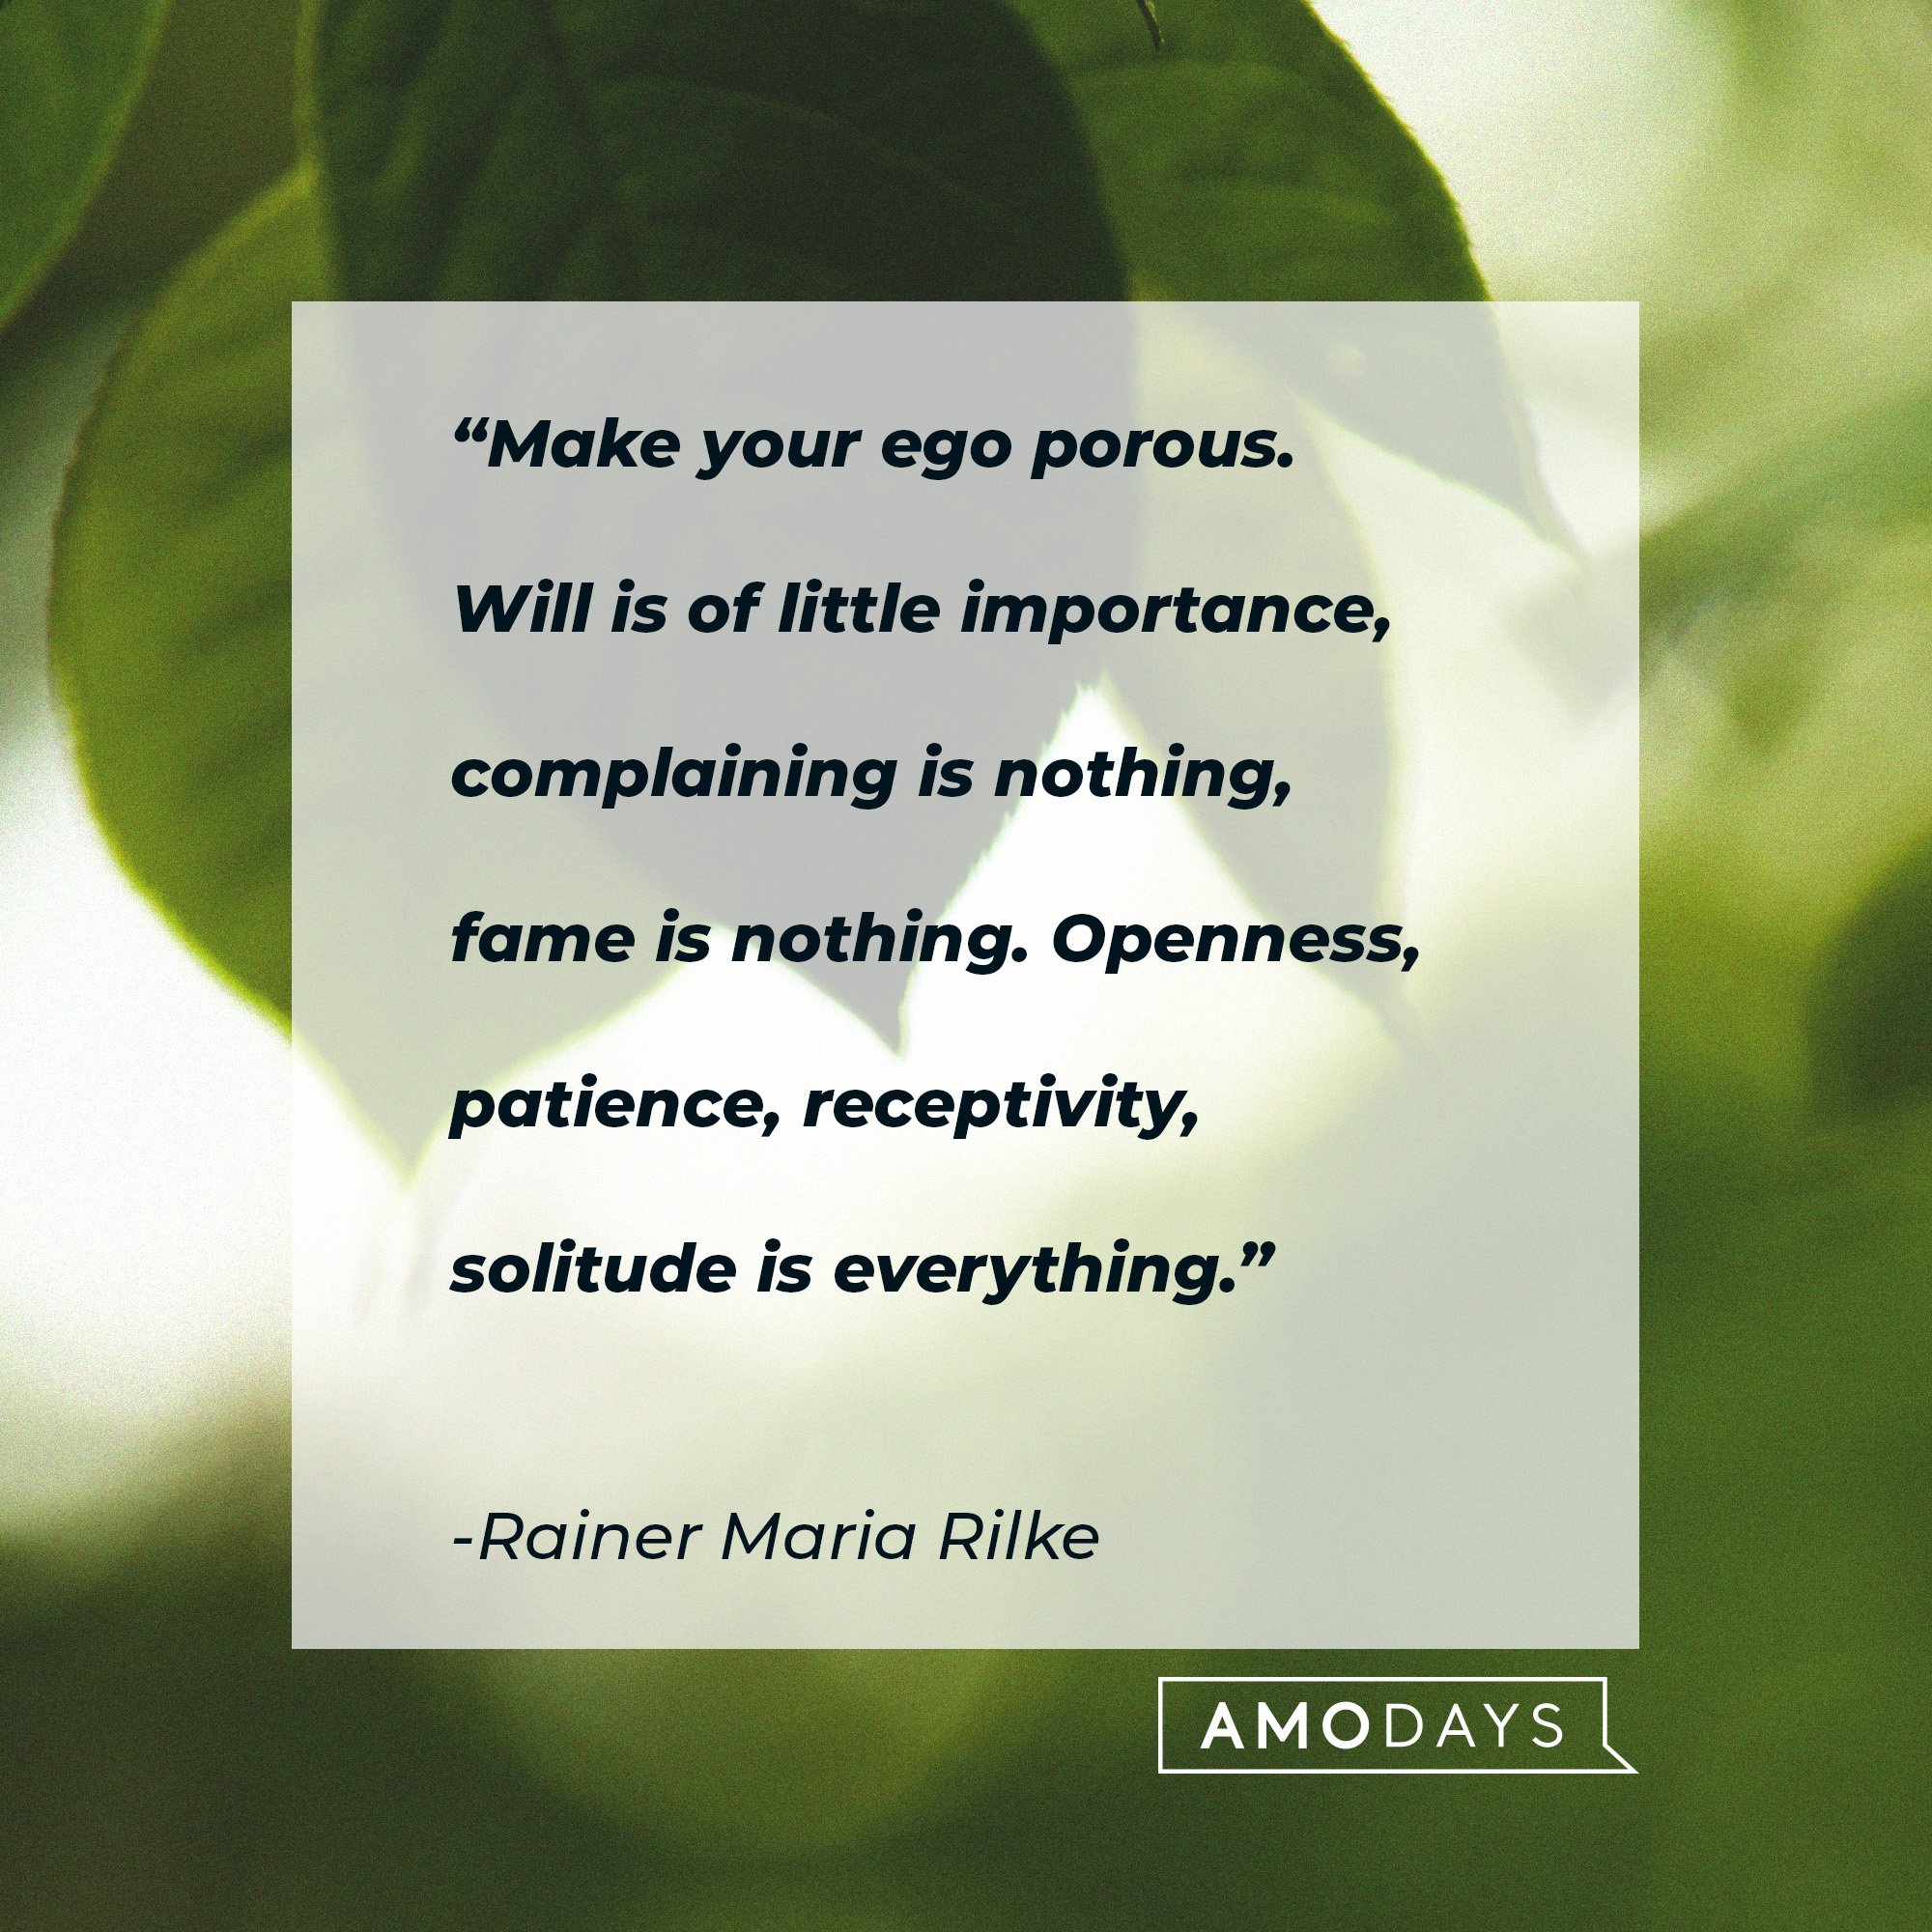  Rainer Maria Rilke's quote: “Make your ego porous. Will is of little importance, complaining is nothing, fame is nothing. Openness, patience, receptivity, solitude is everything.” | Image: AmoDays